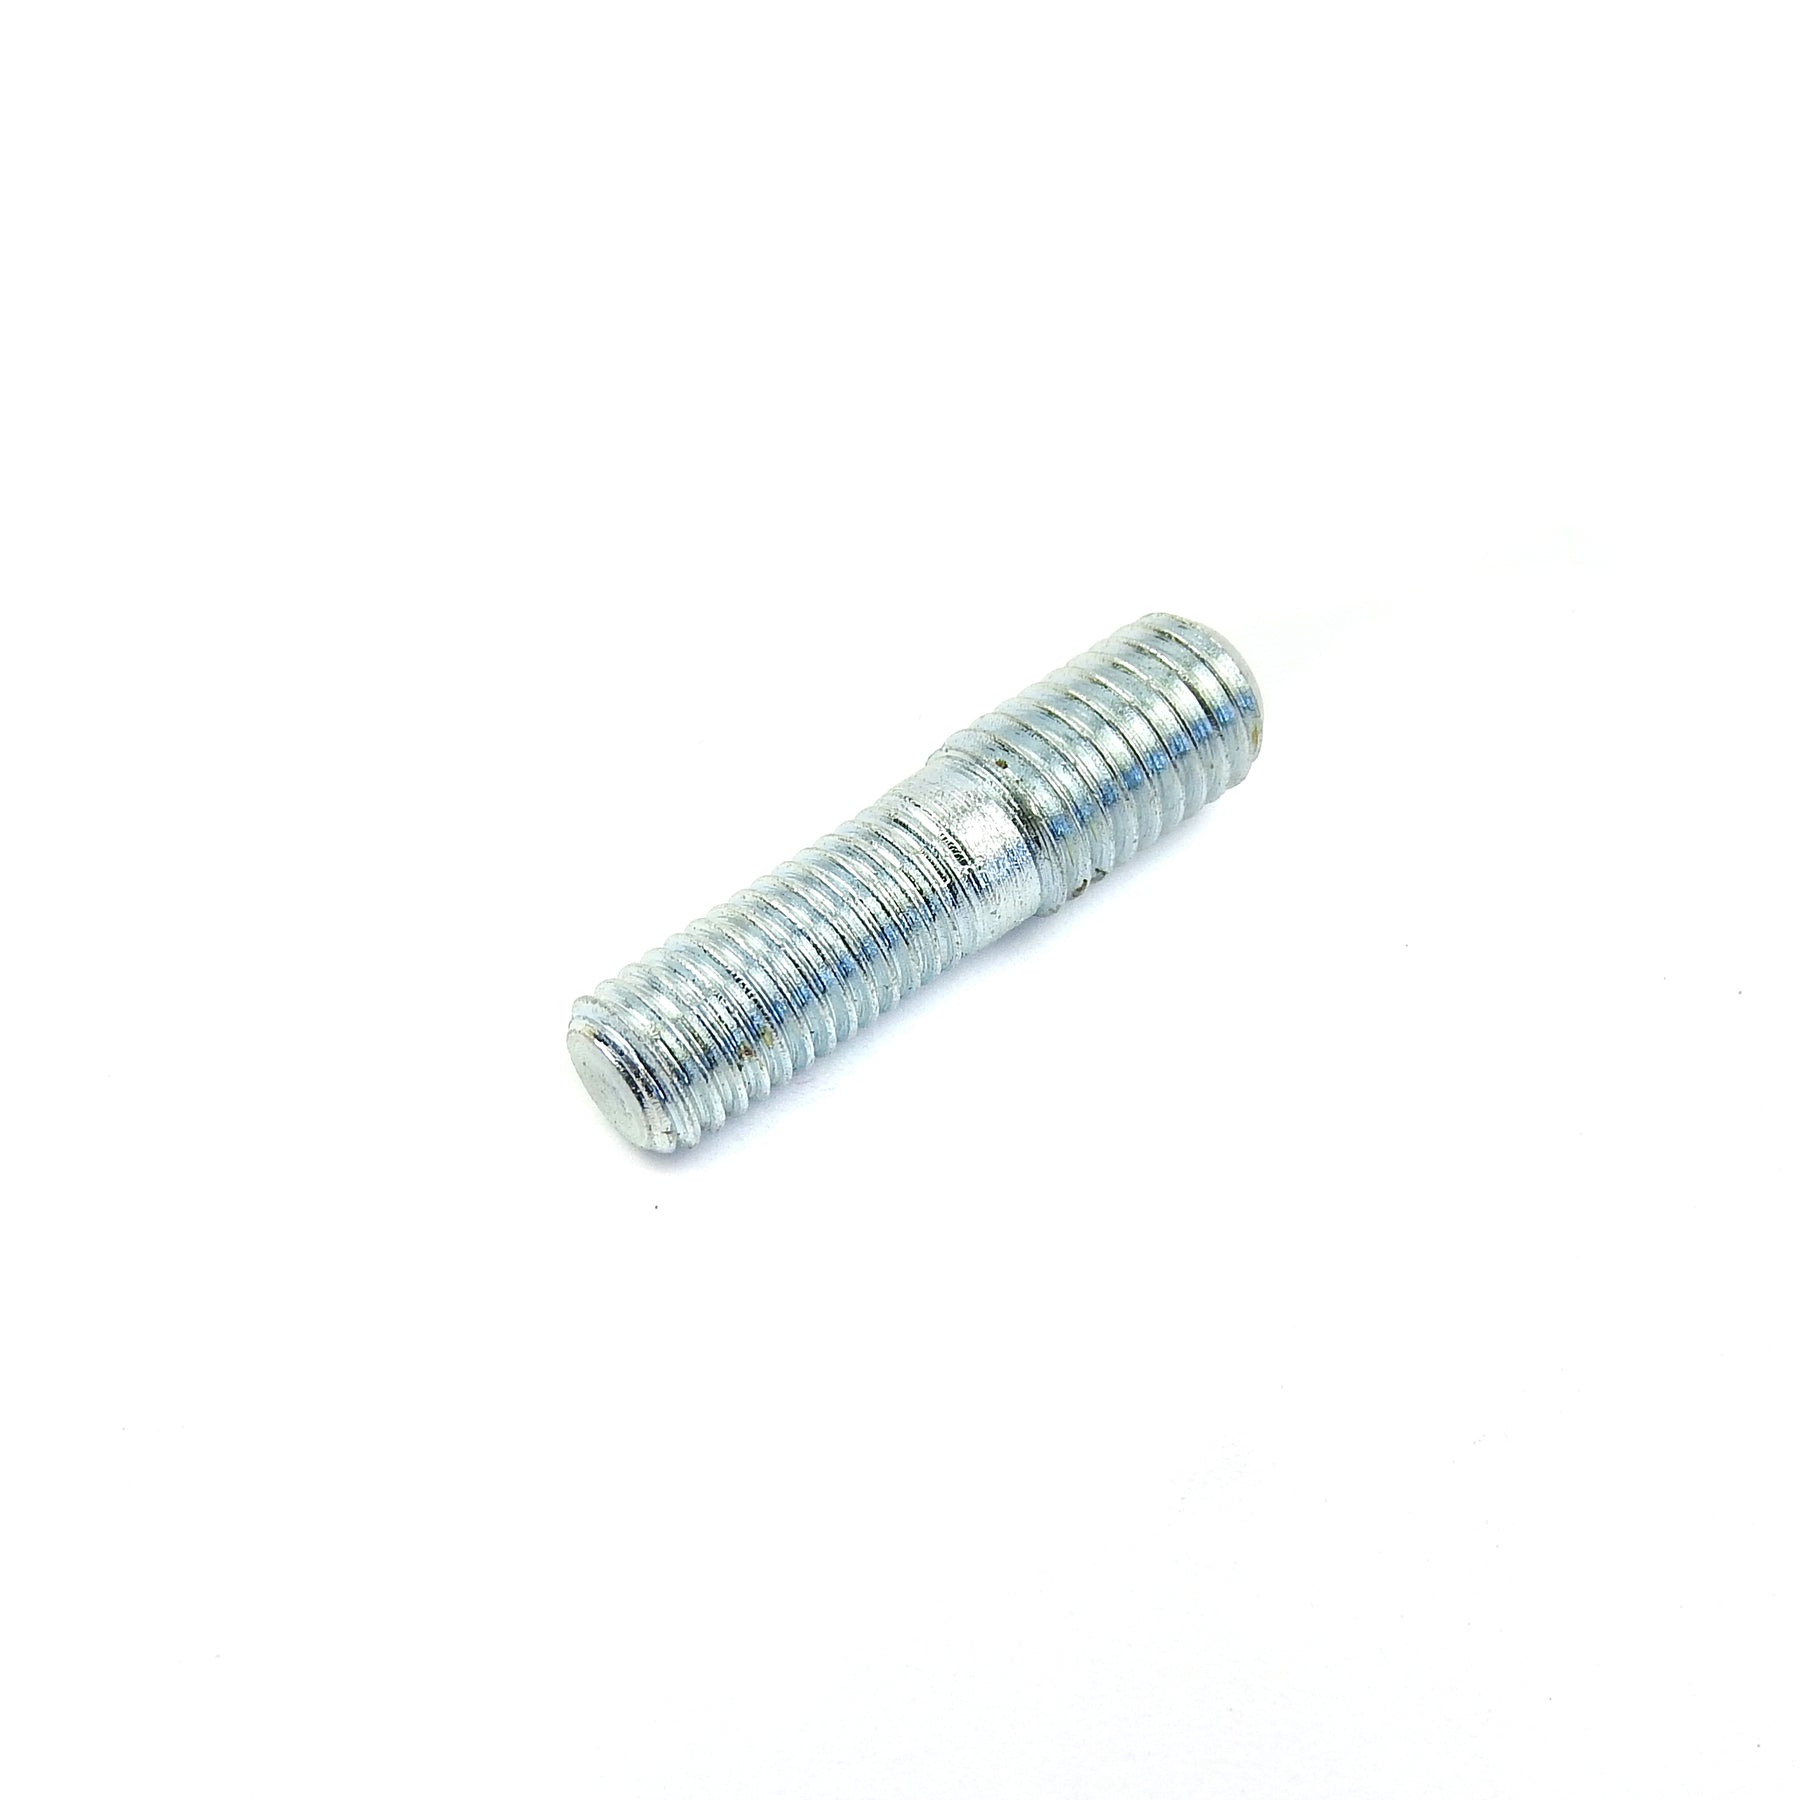 Repair Stud 7mm to 8mm 31mm in Long length with Zinc Plated